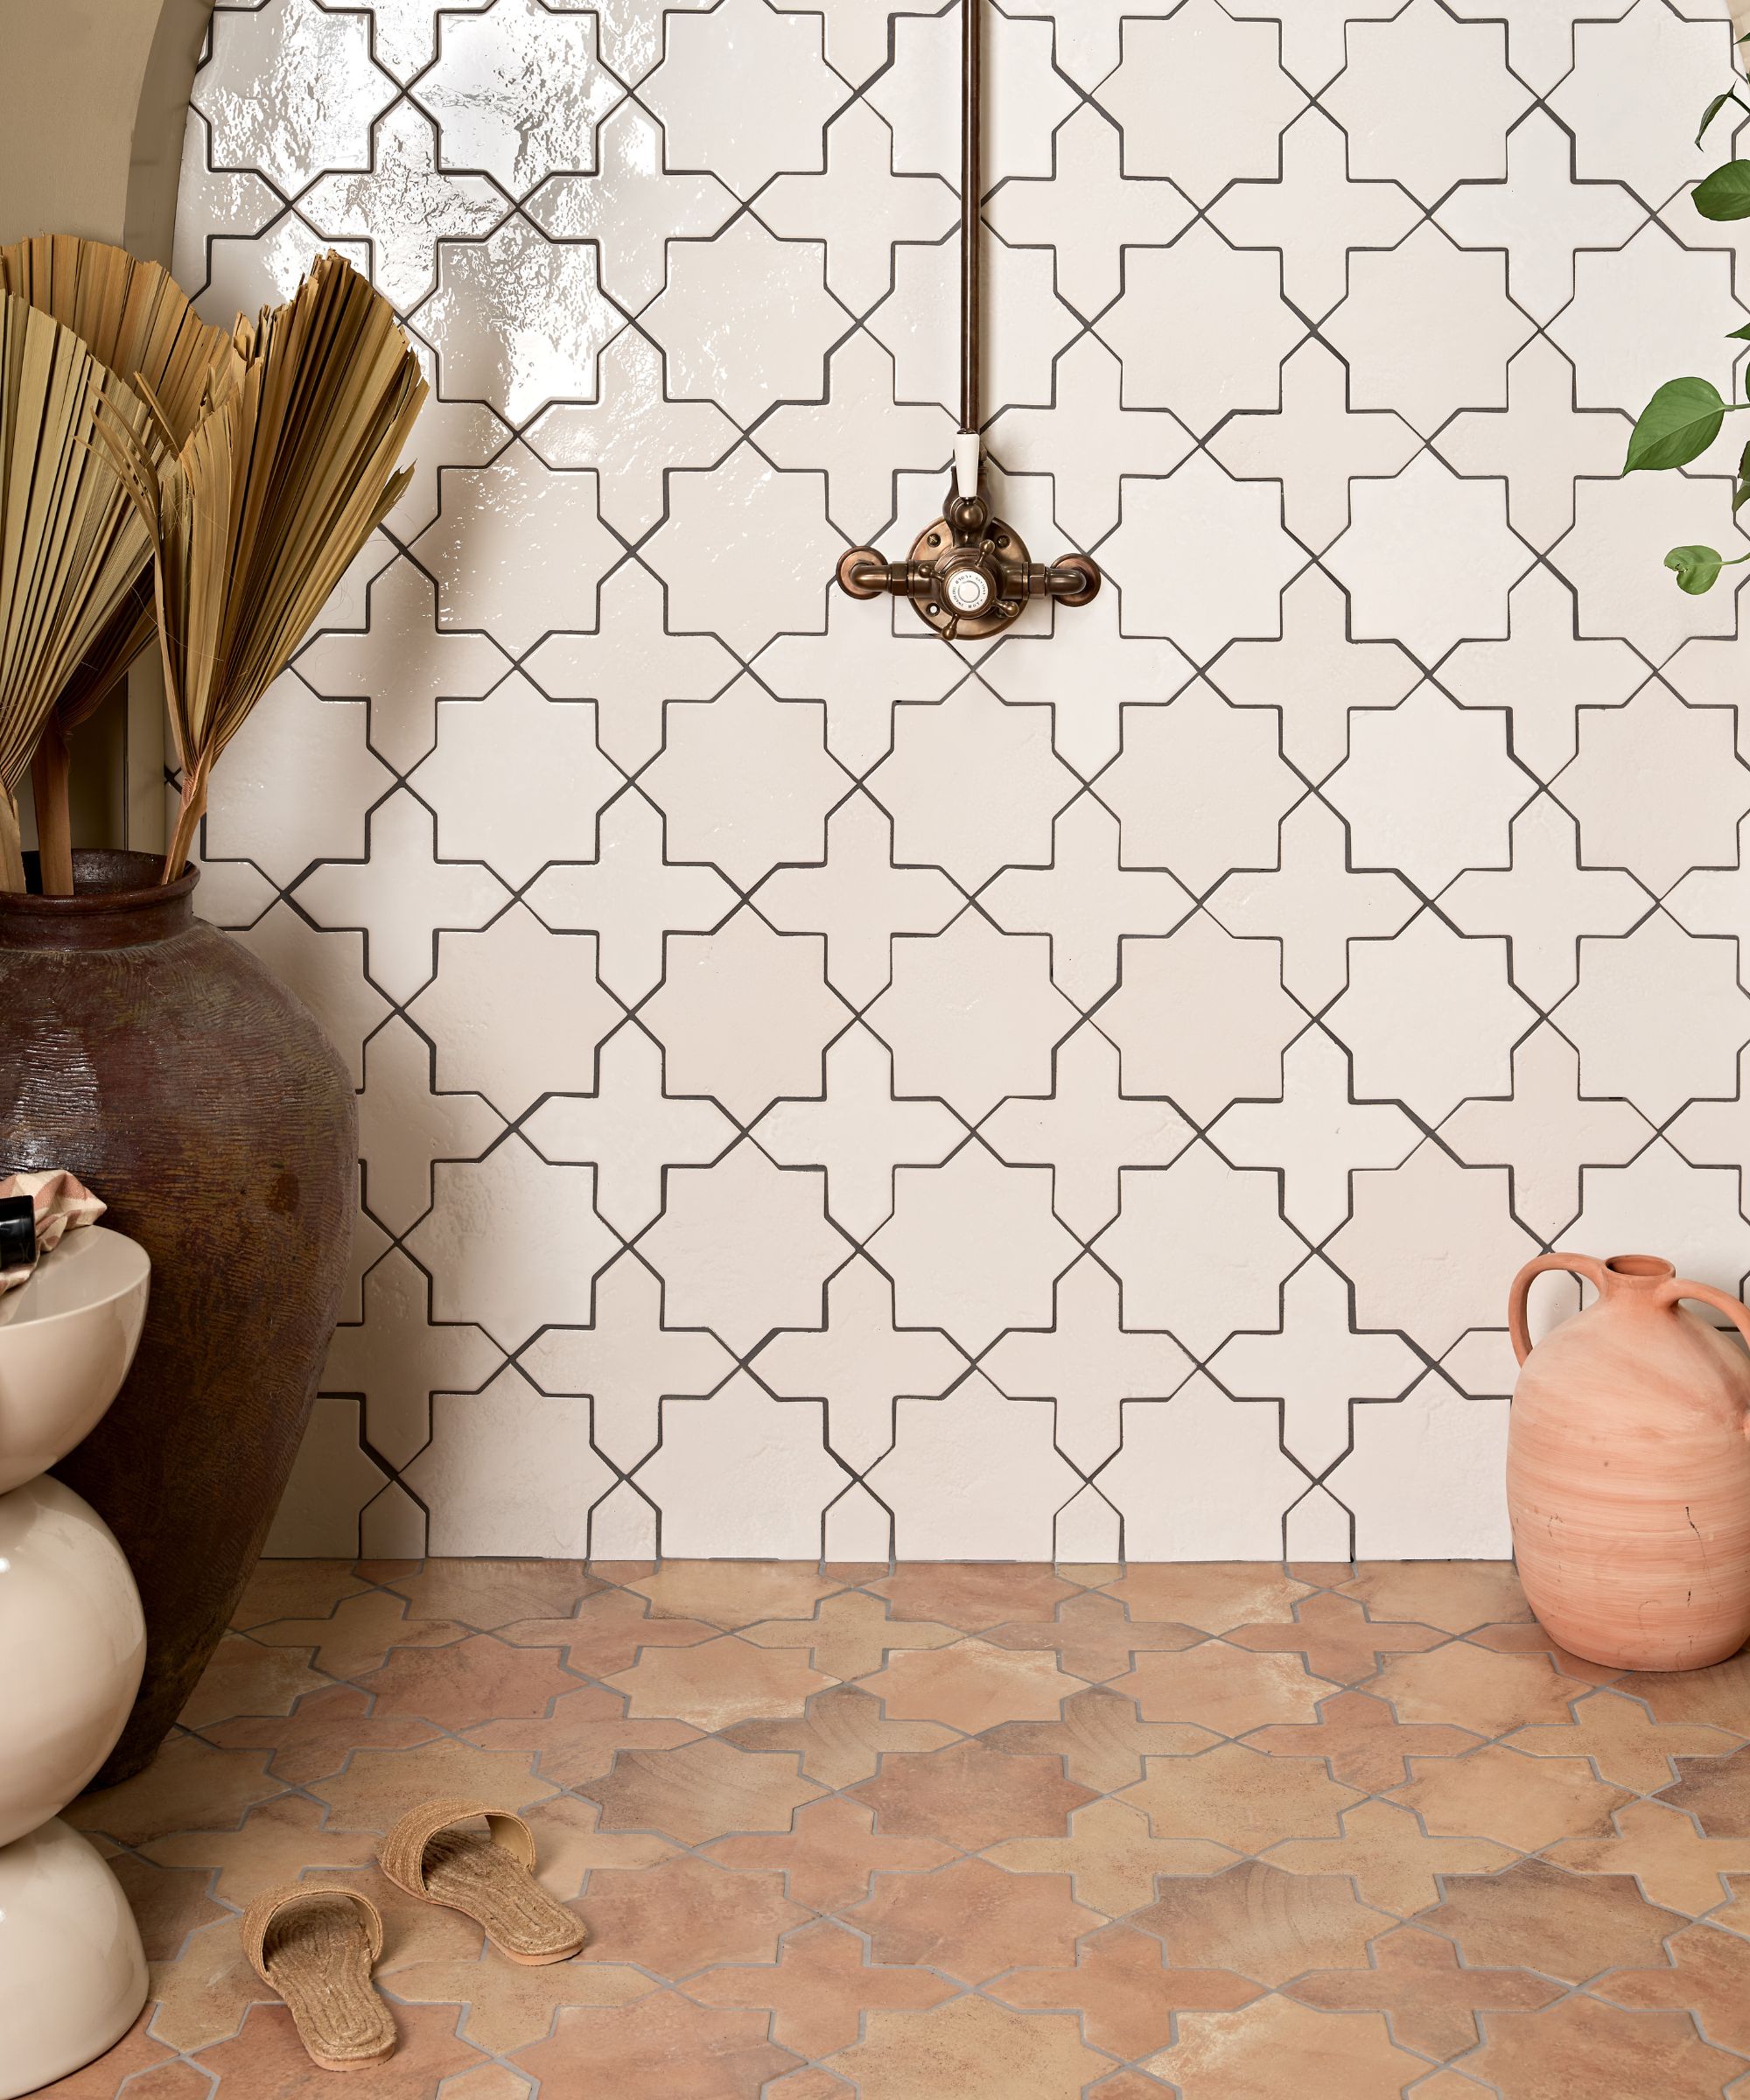 A shower with white geometric tiles on the wall and terracotta geometric tiles on the floor